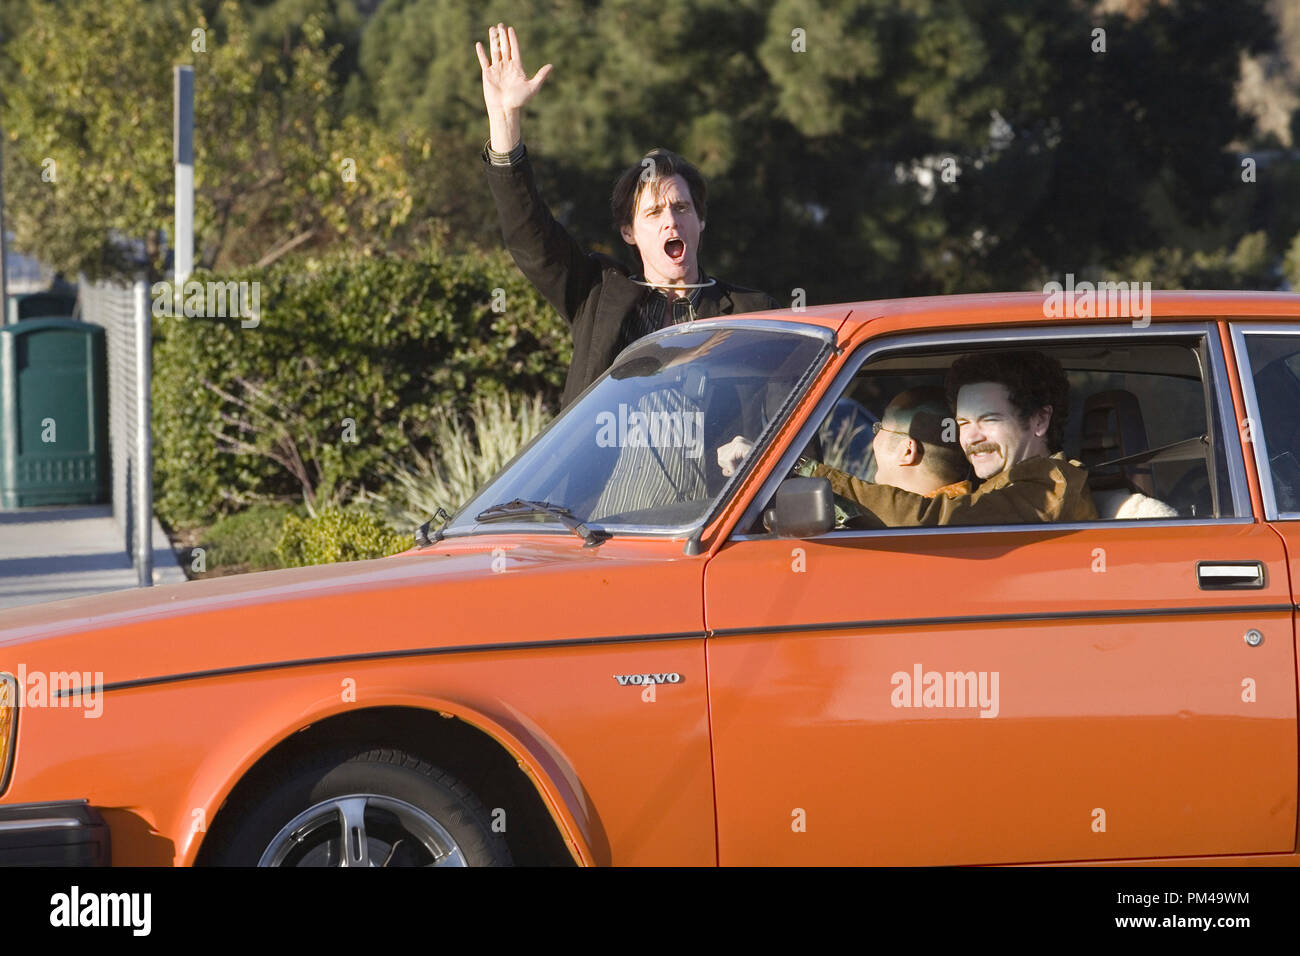 (L-r) Carl (JIM CARREY) shouts as his friends Lee (AARON TAKAHASHI) and Rooney (DANNY MASTERSON) look on in Warner Bros. Pictures' and Village Roadshow's comedy 'Yes Man,' distributed by Warner Bros. Pictures. Stock Photo